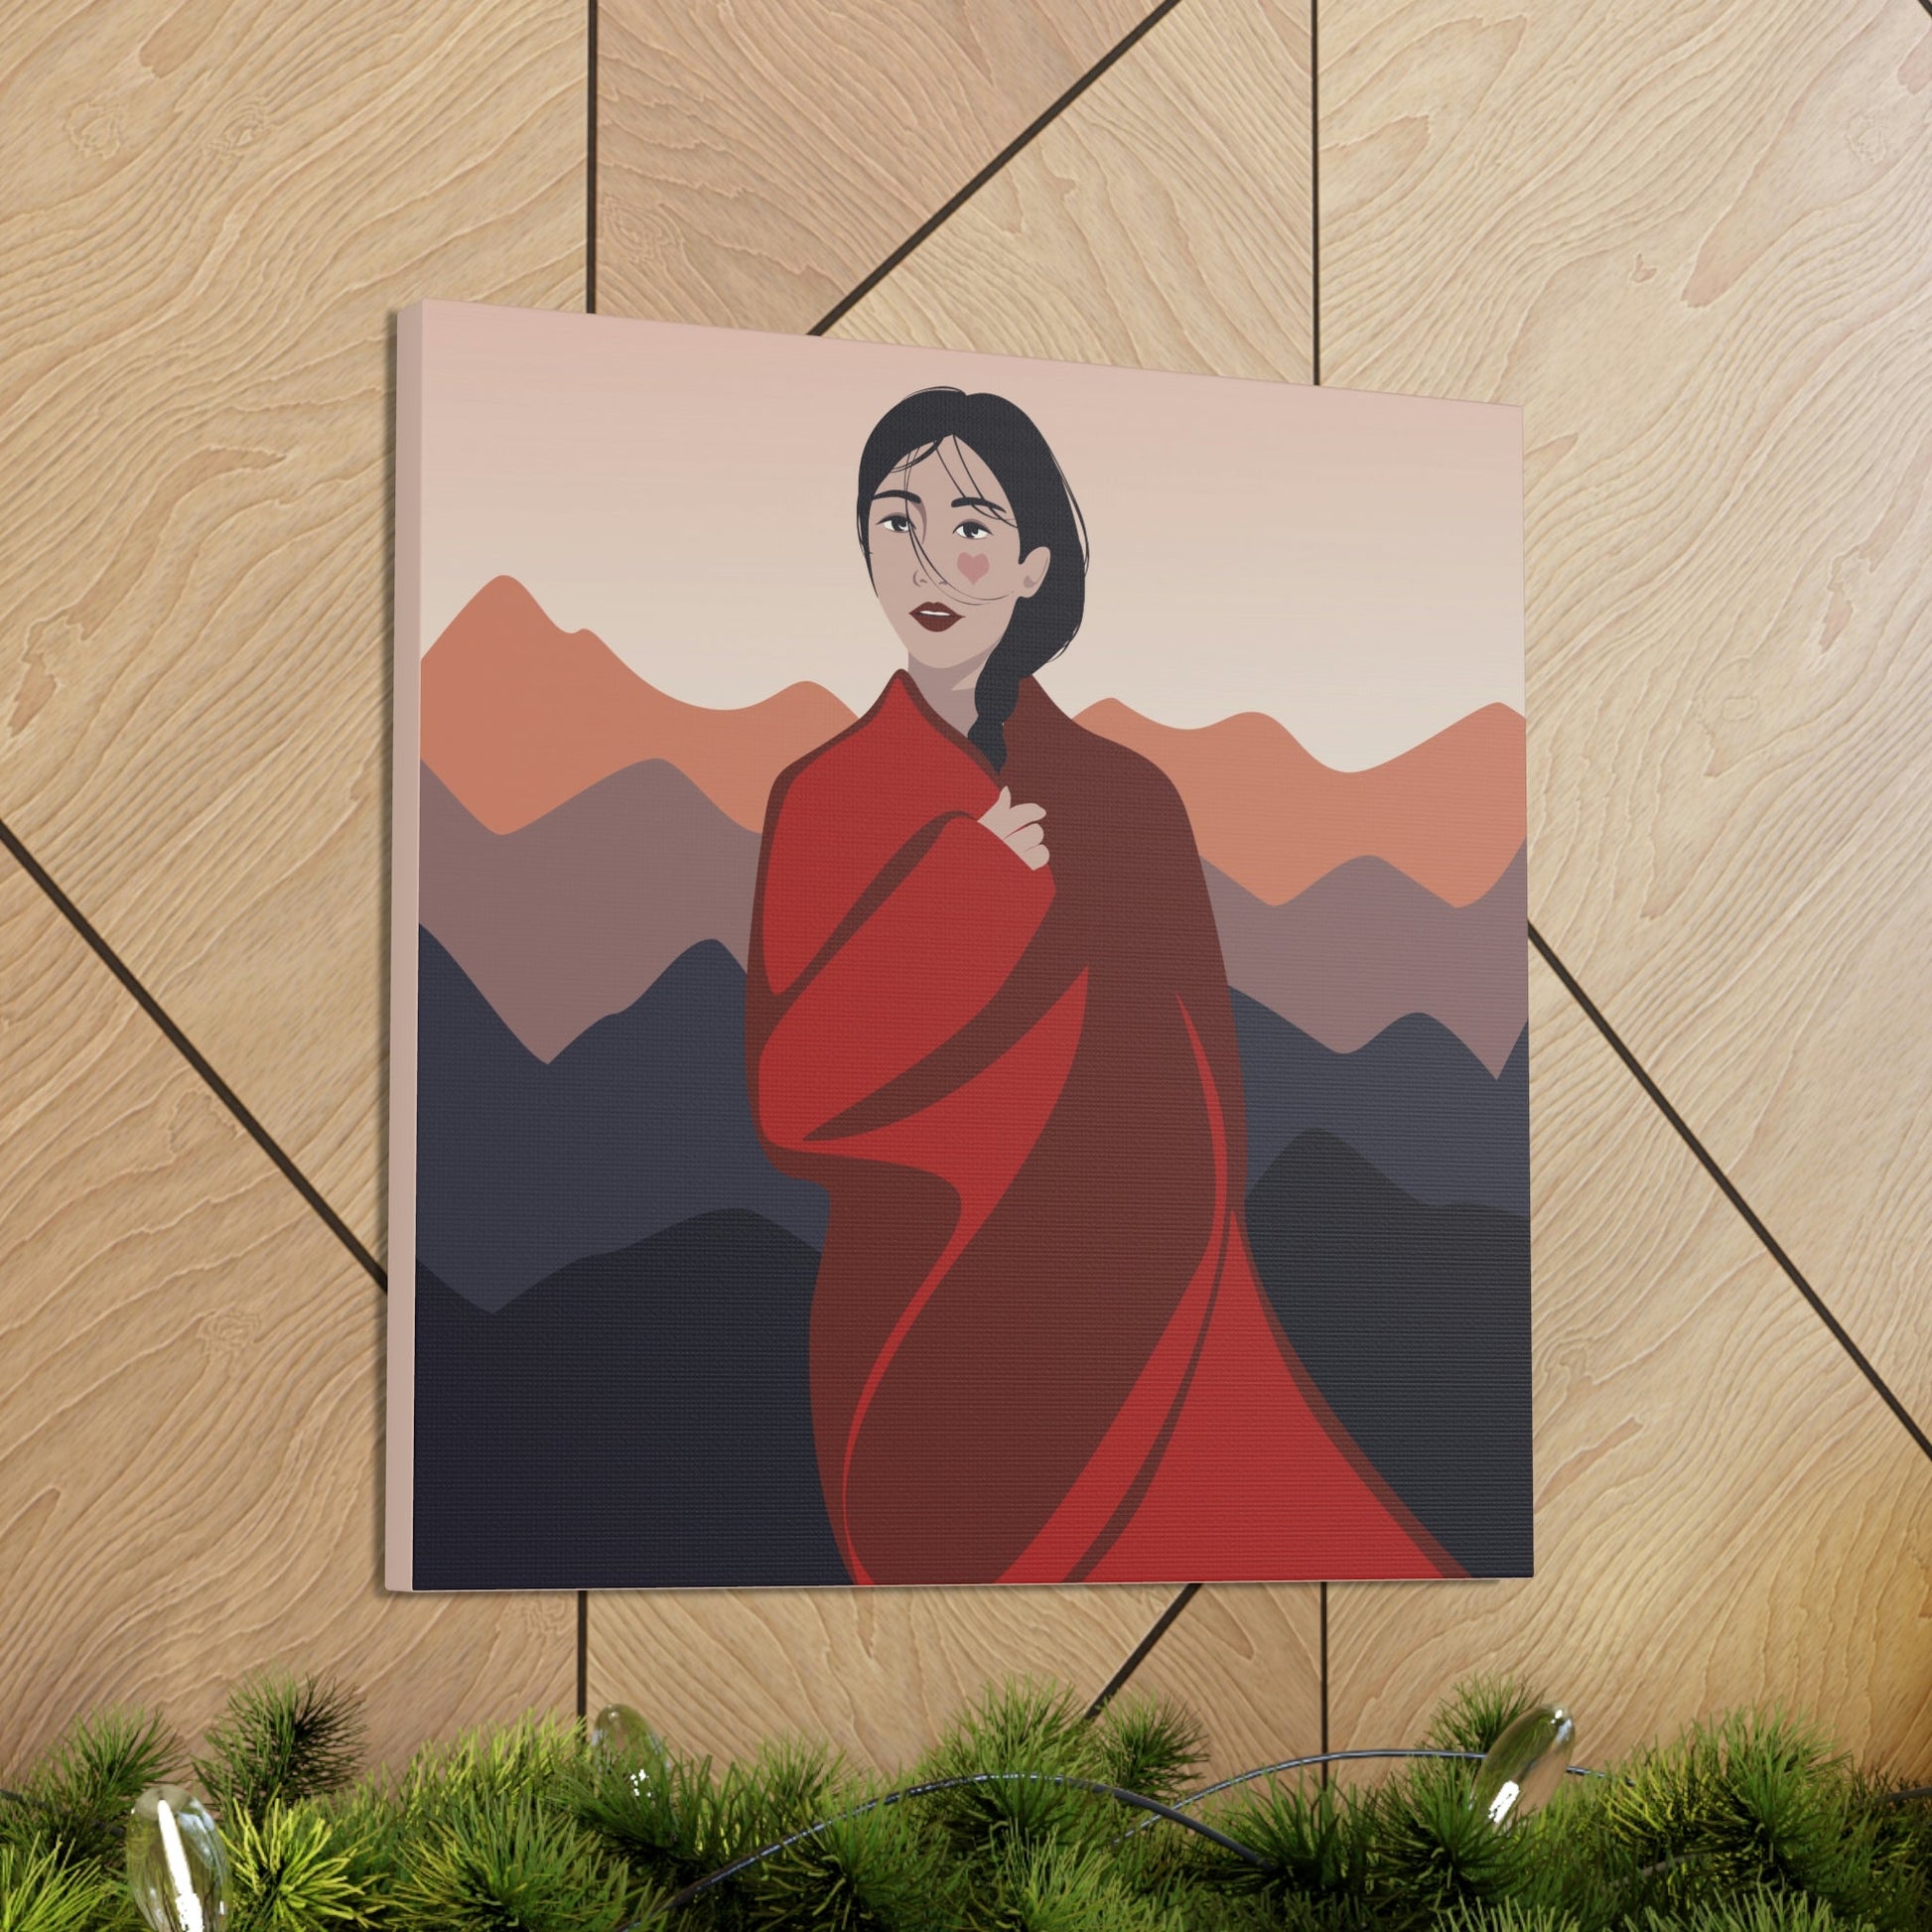 Stunning Woman in Traditional Japan Art Graphic Classic Art Canvas Gallery Wraps Ichaku [Perfect Gifts Selection]